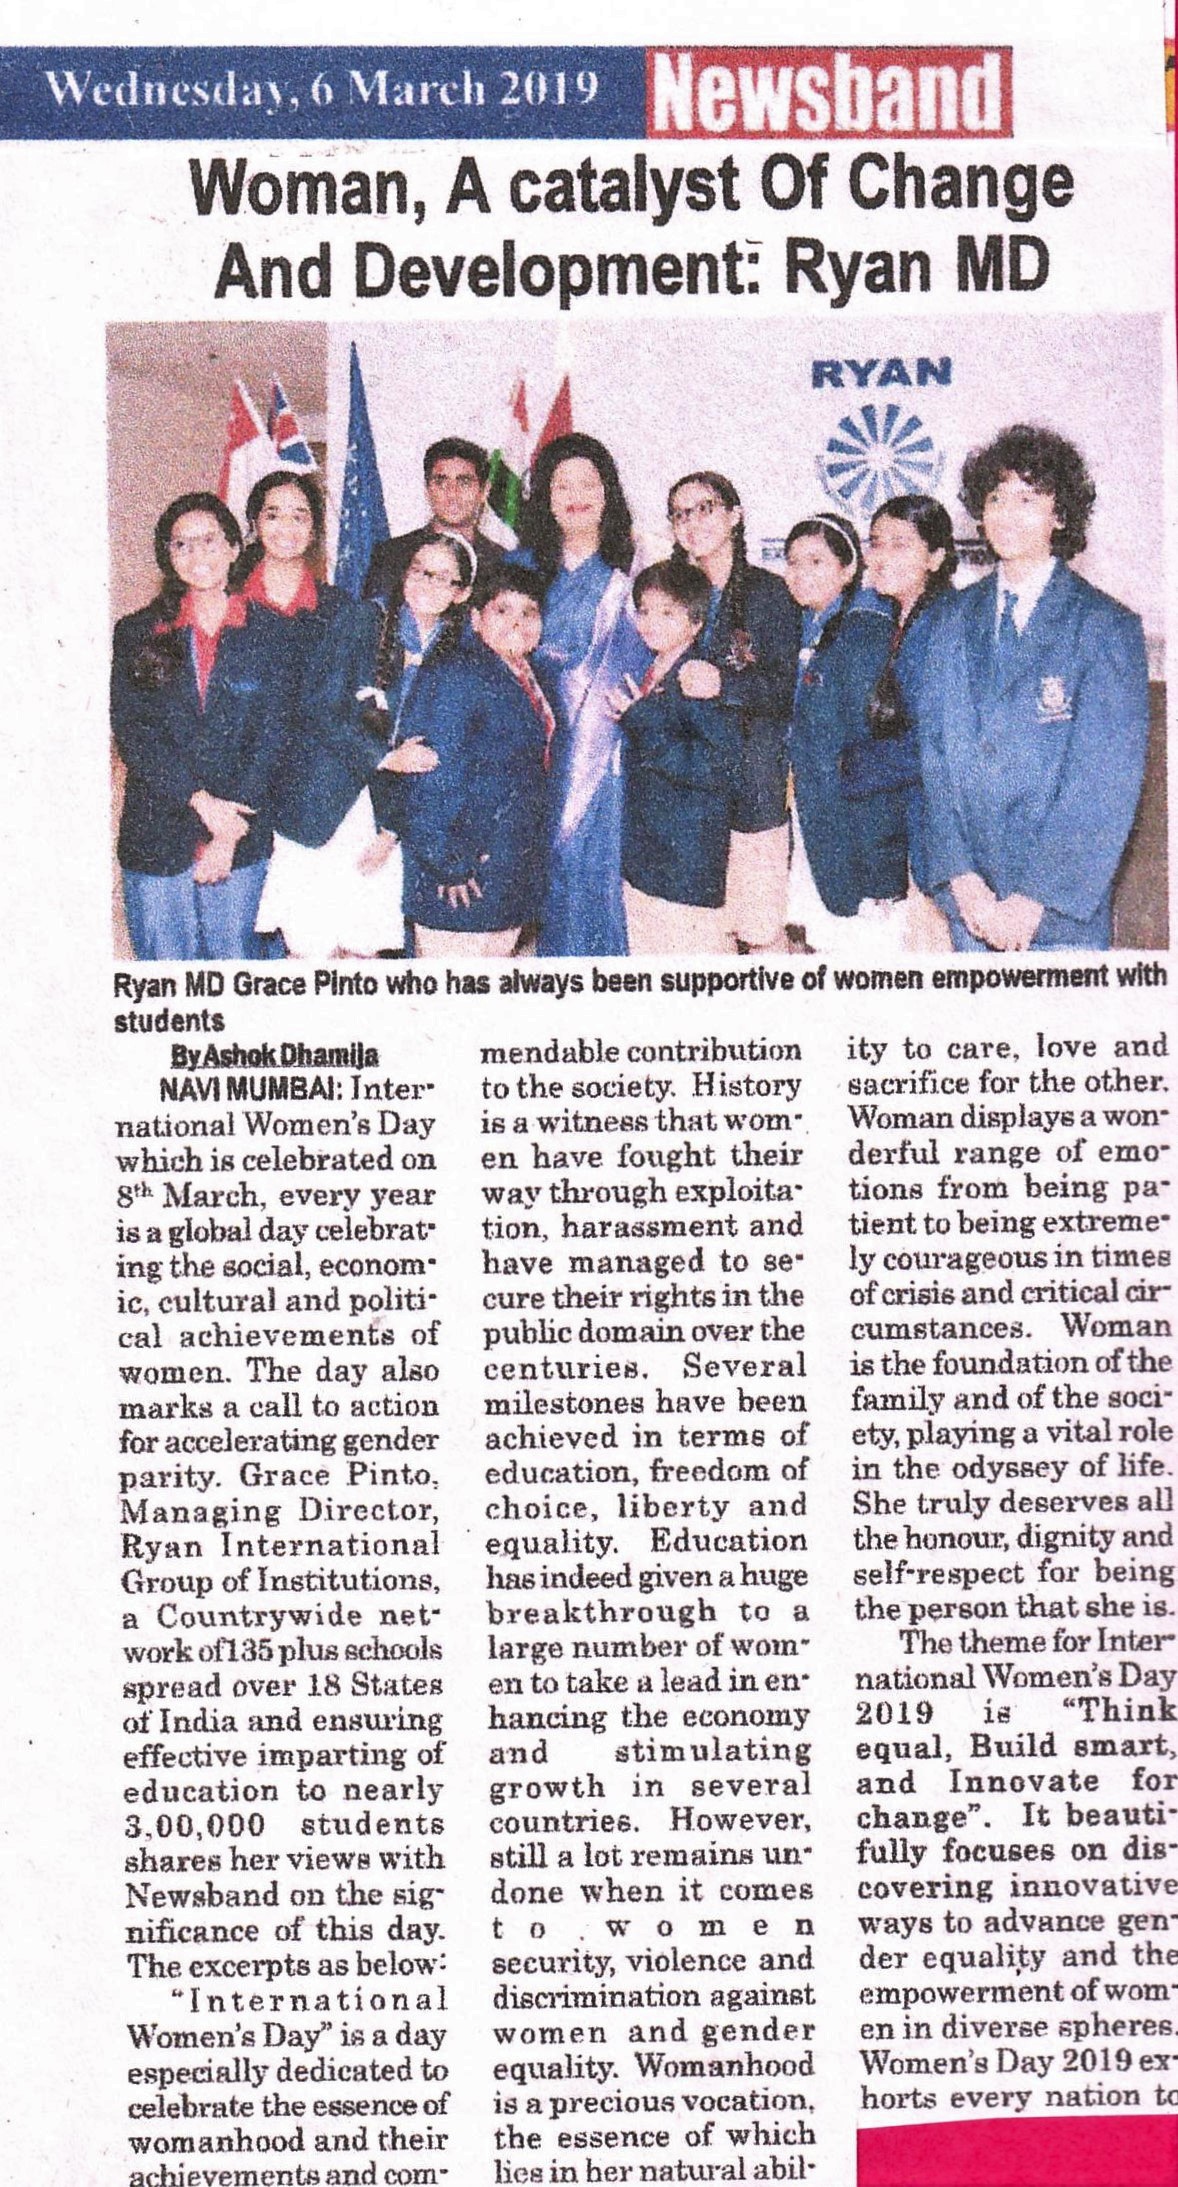 Women A catalyst of change and development was mentioned in Newsband - Ryan International School, Kharghar - Ryan Group